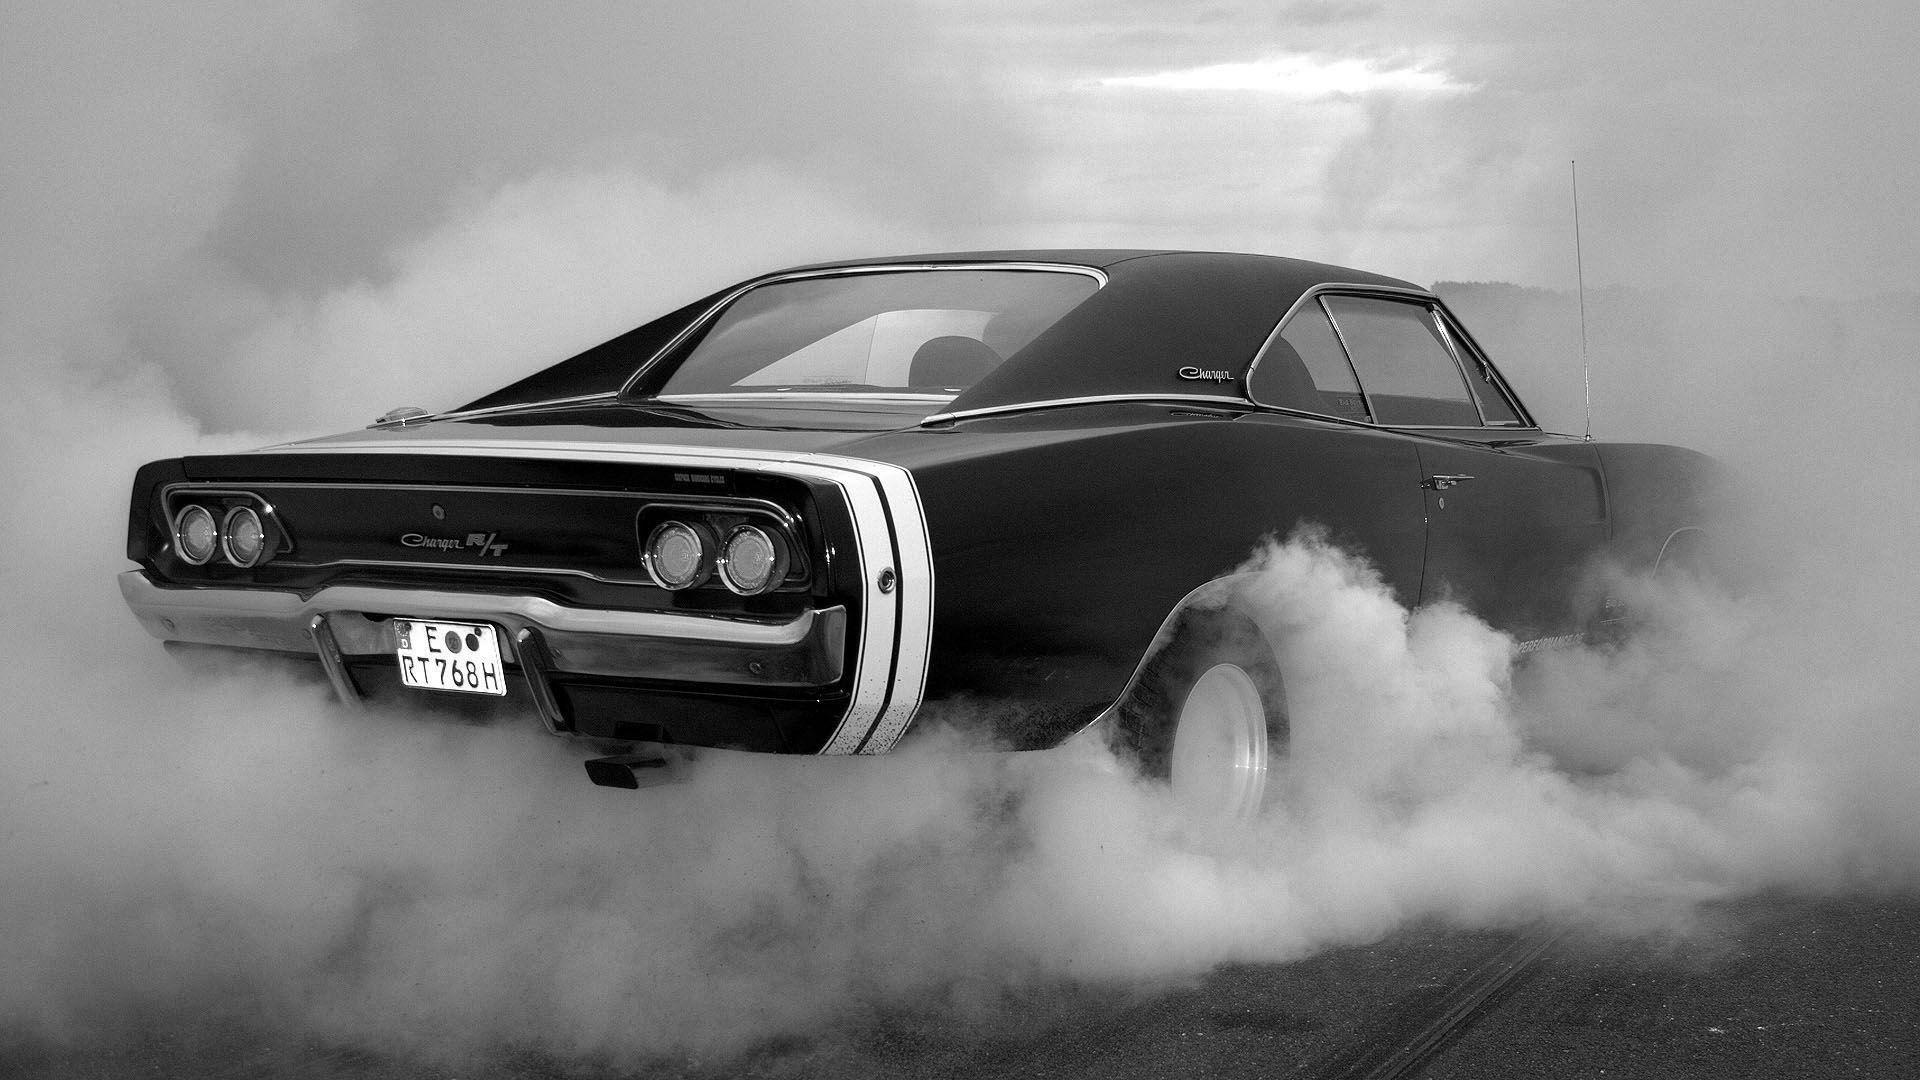 50+ Old Cars In Black And White Color Wallpaper full HD